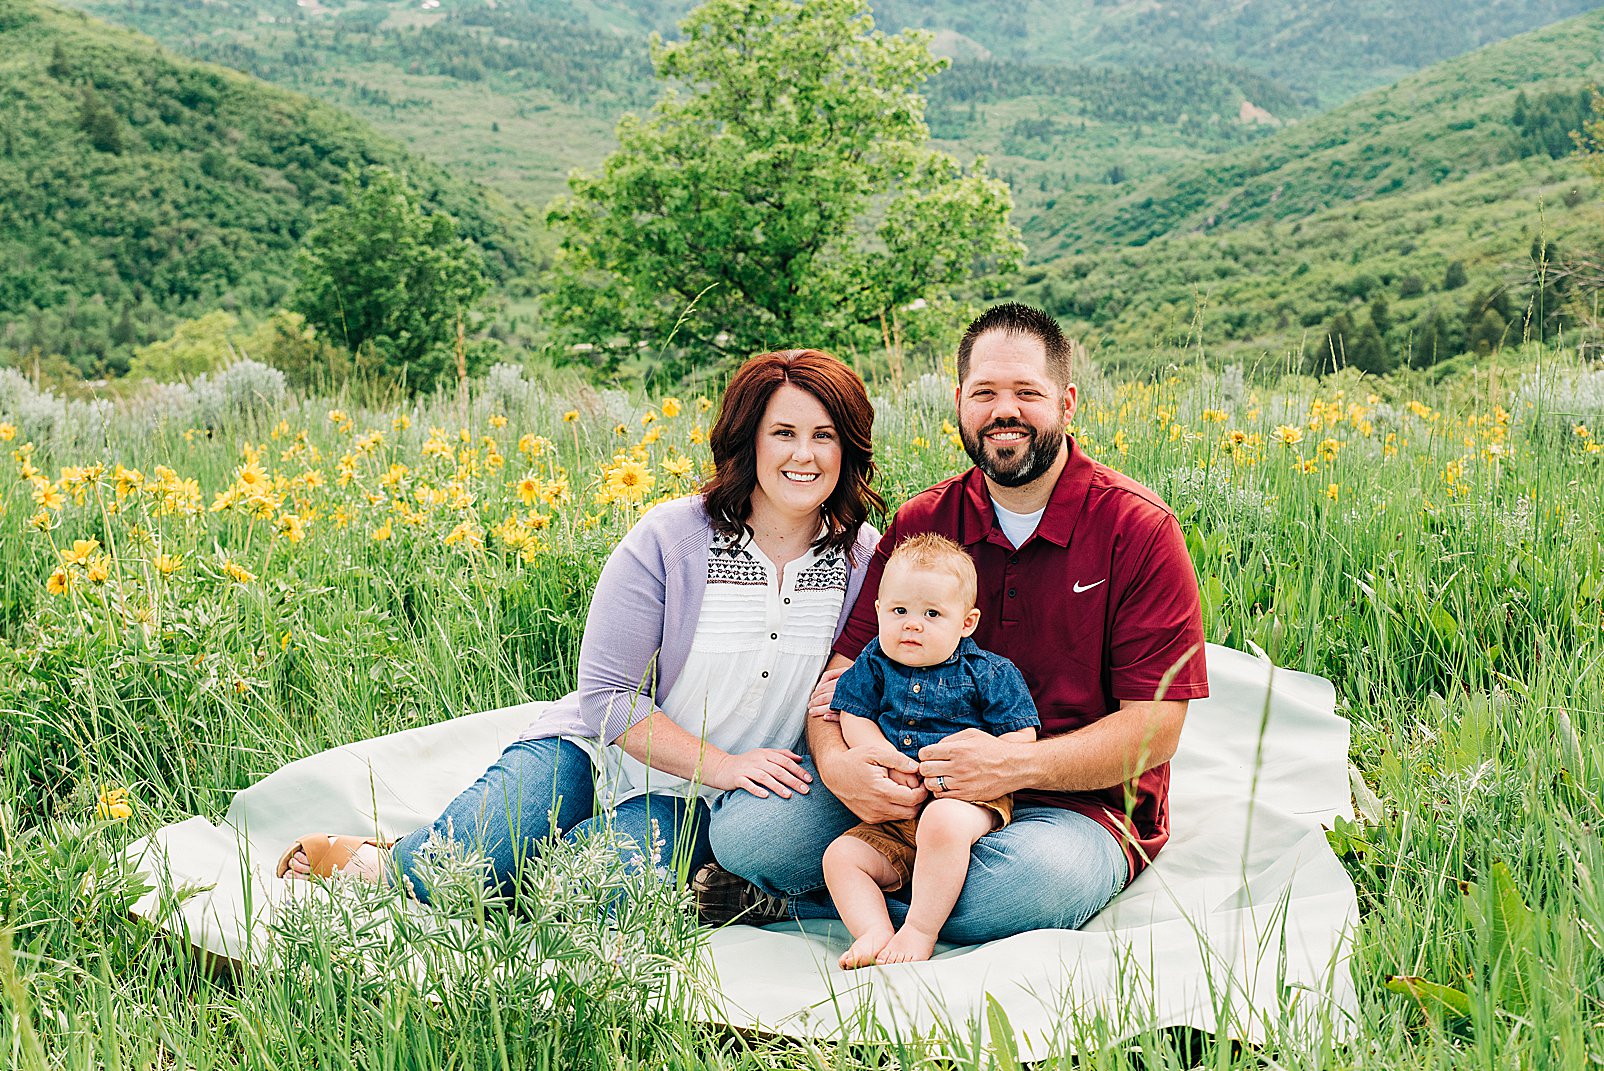 snowbasin wildflowers family session